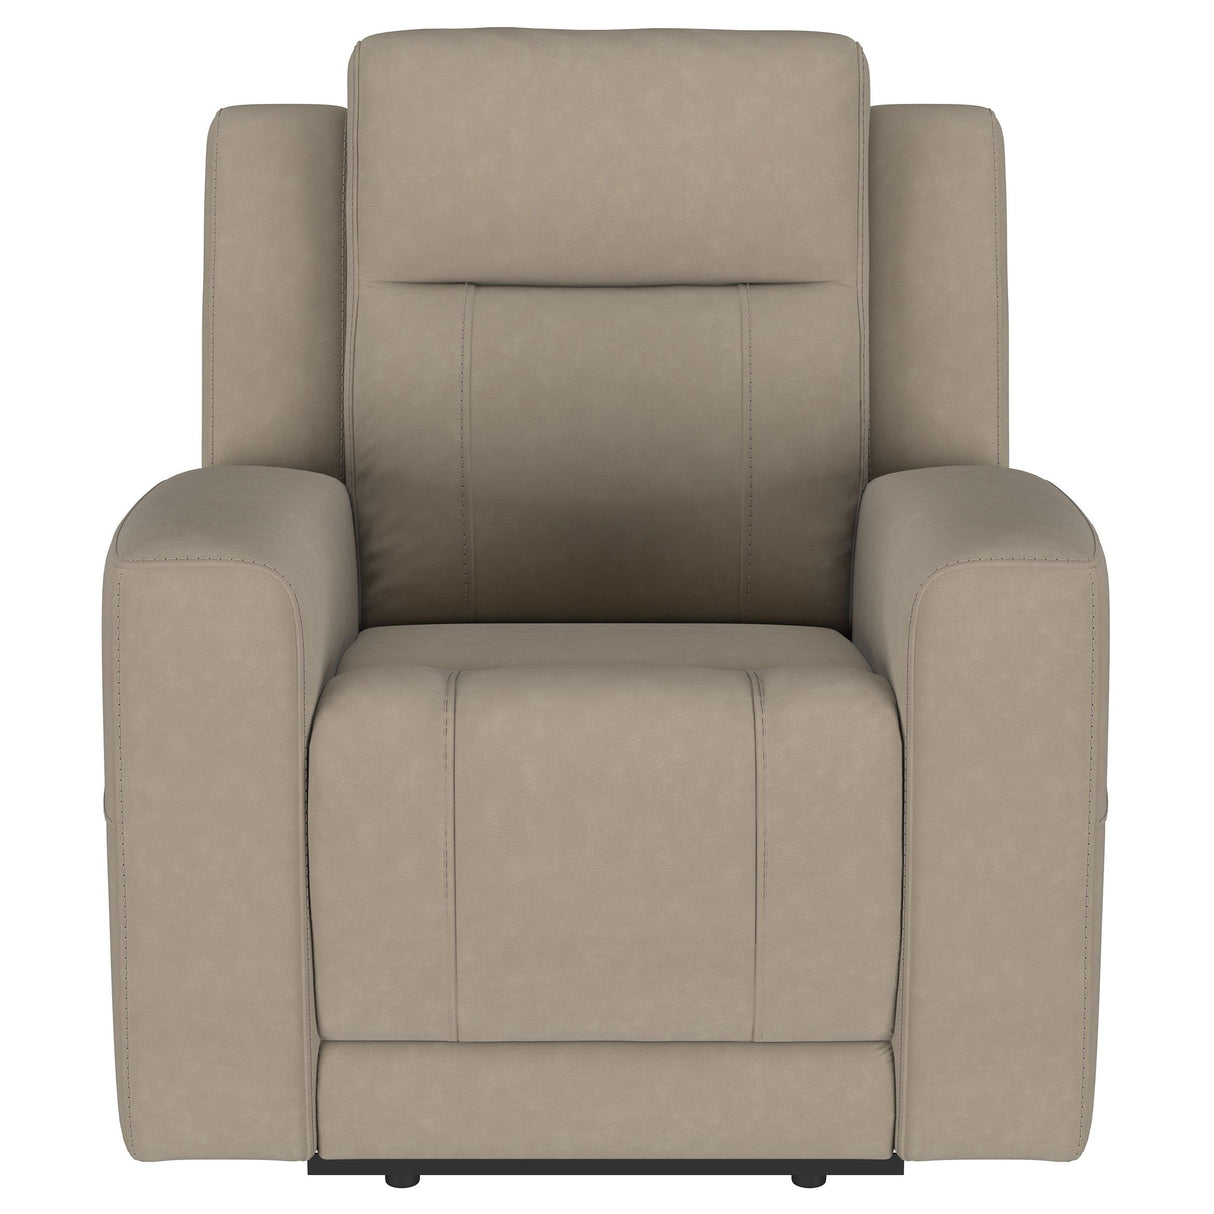 Brentwood - Upholstered Recliner Chair